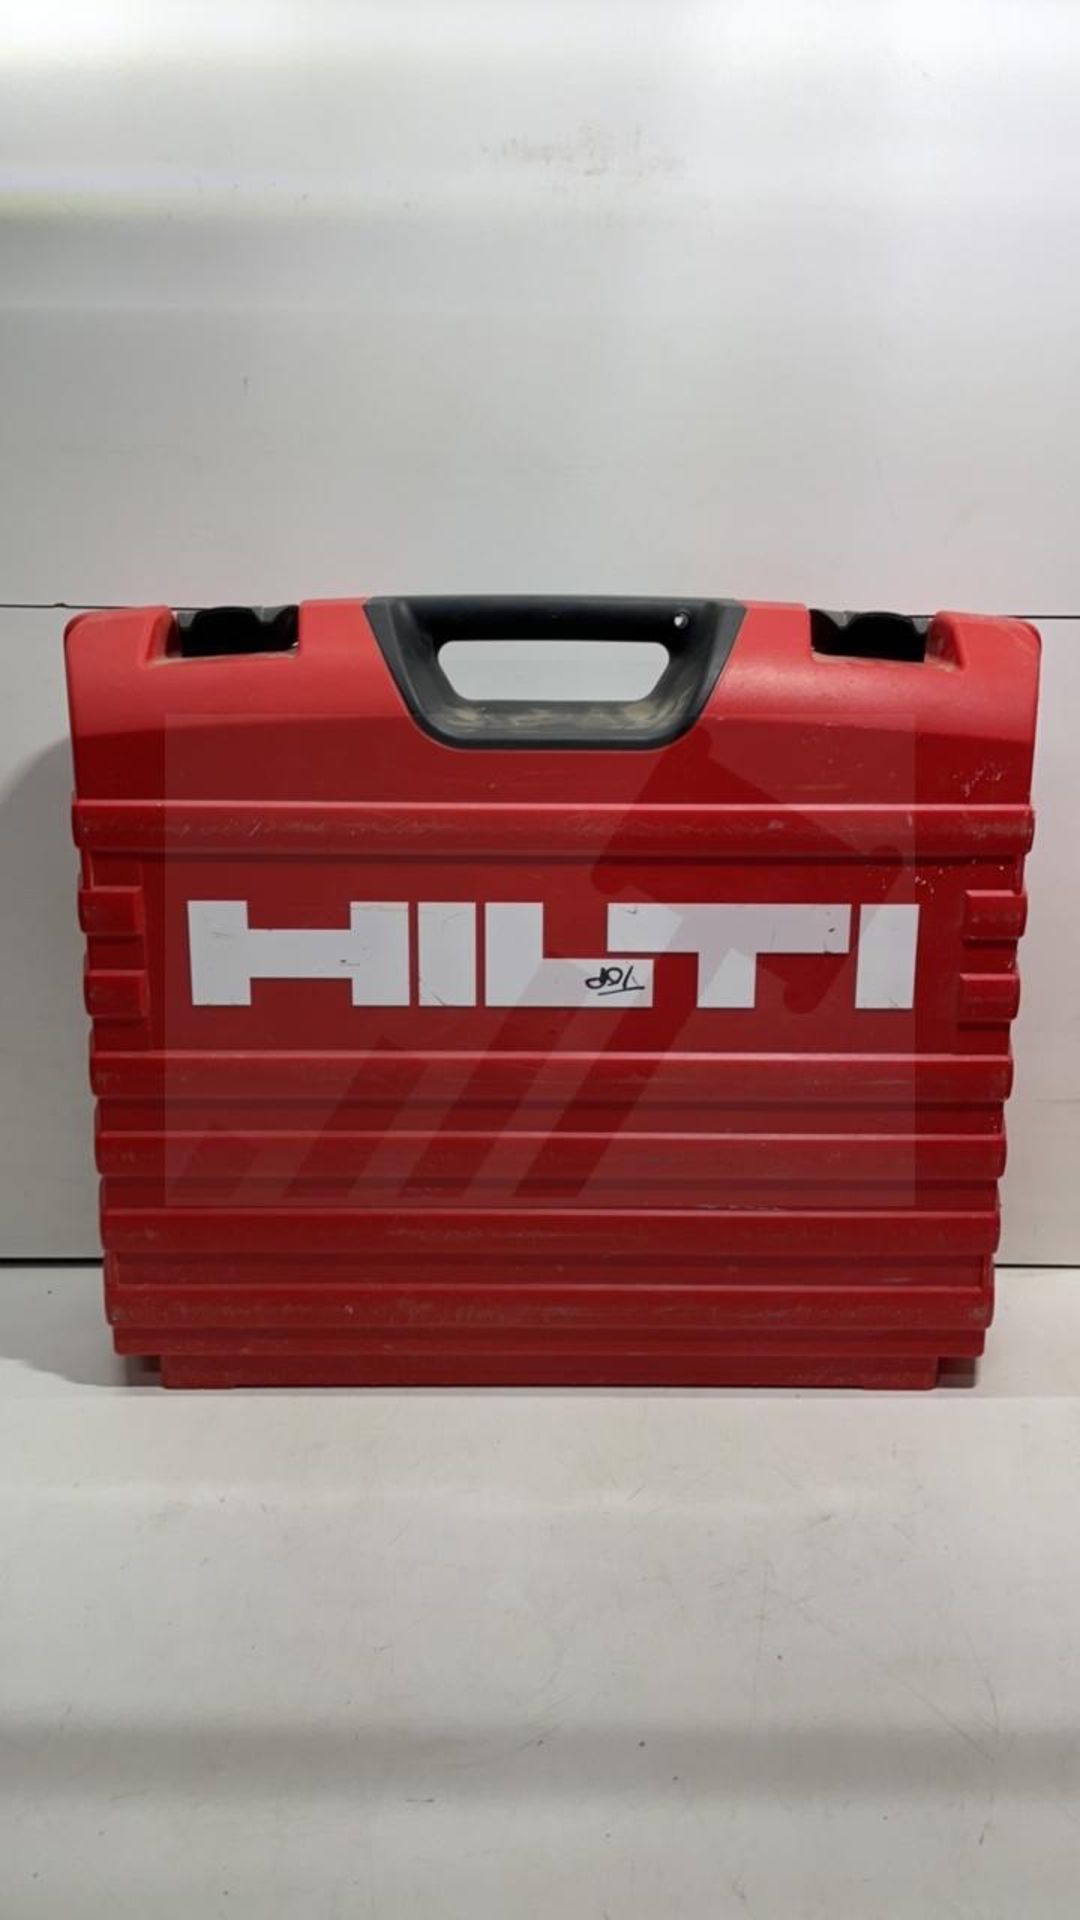 HILTI GX120 Gas Nailer w/Single Power Source for Metal Track, Electrical, Mechanical & Building Cons - Image 5 of 5